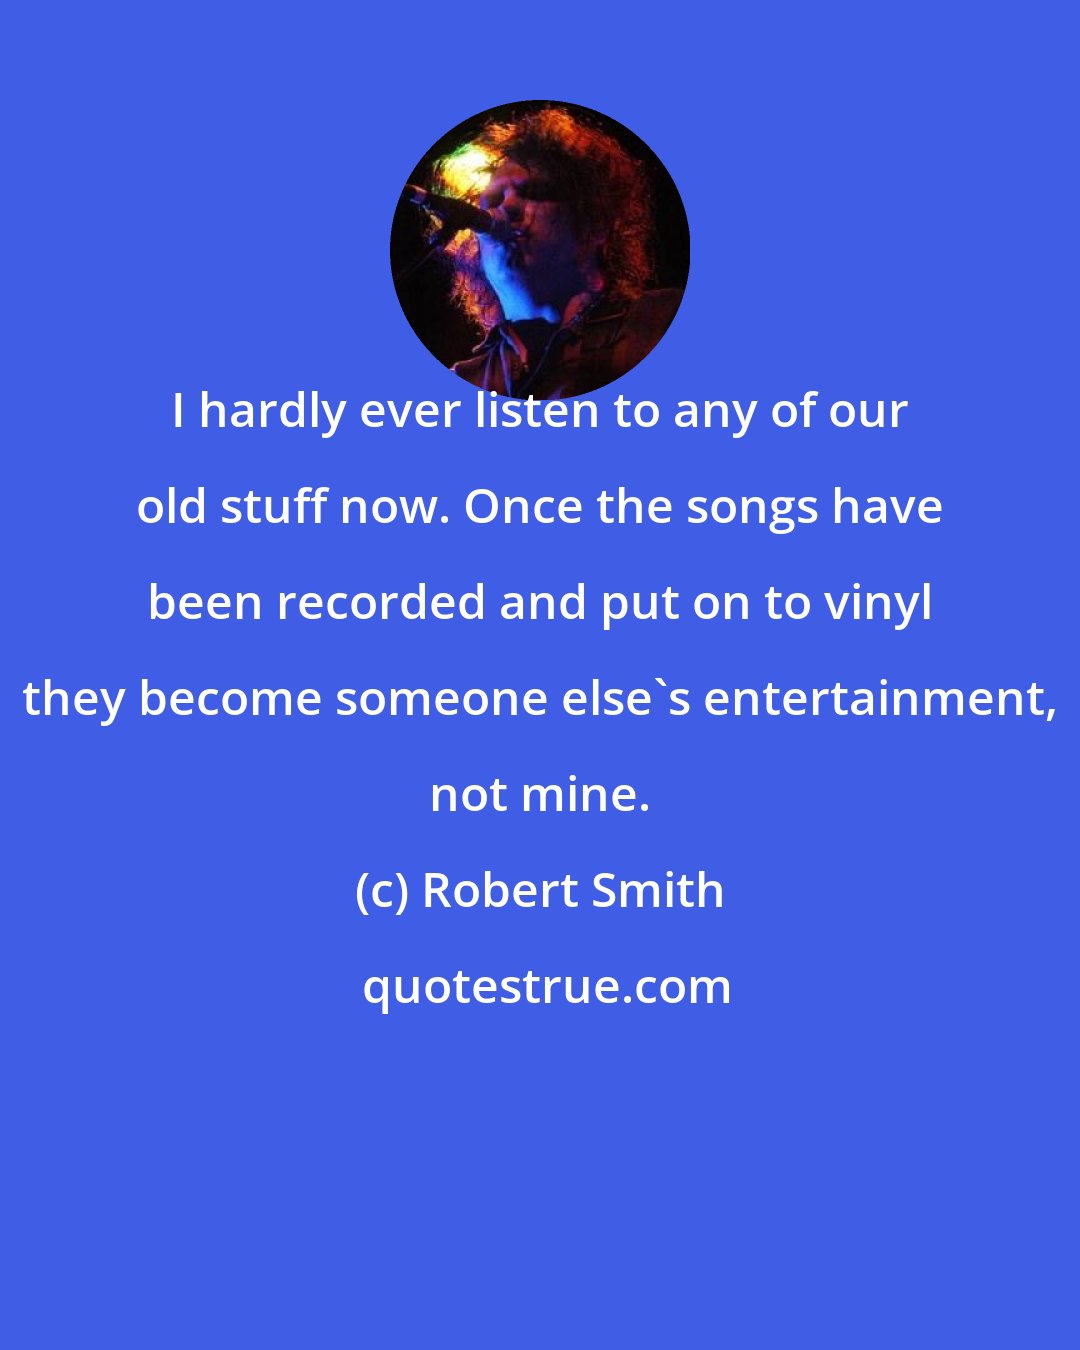 Robert Smith: I hardly ever listen to any of our old stuff now. Once the songs have been recorded and put on to vinyl they become someone else's entertainment, not mine.